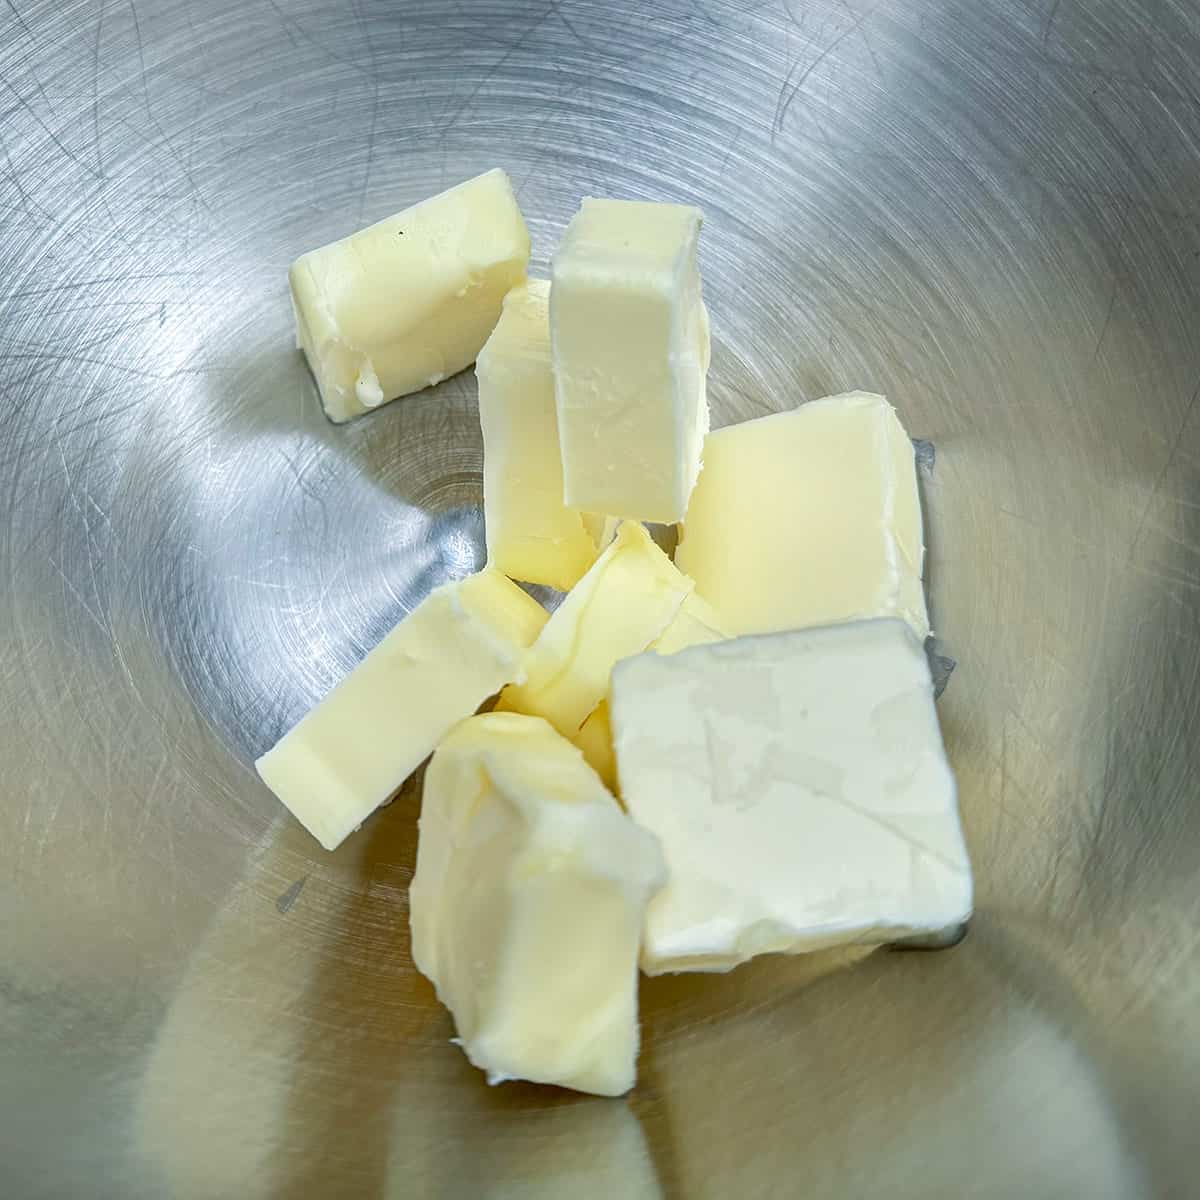 Butter that has been cut into cubes sitting in a mixer bowl.